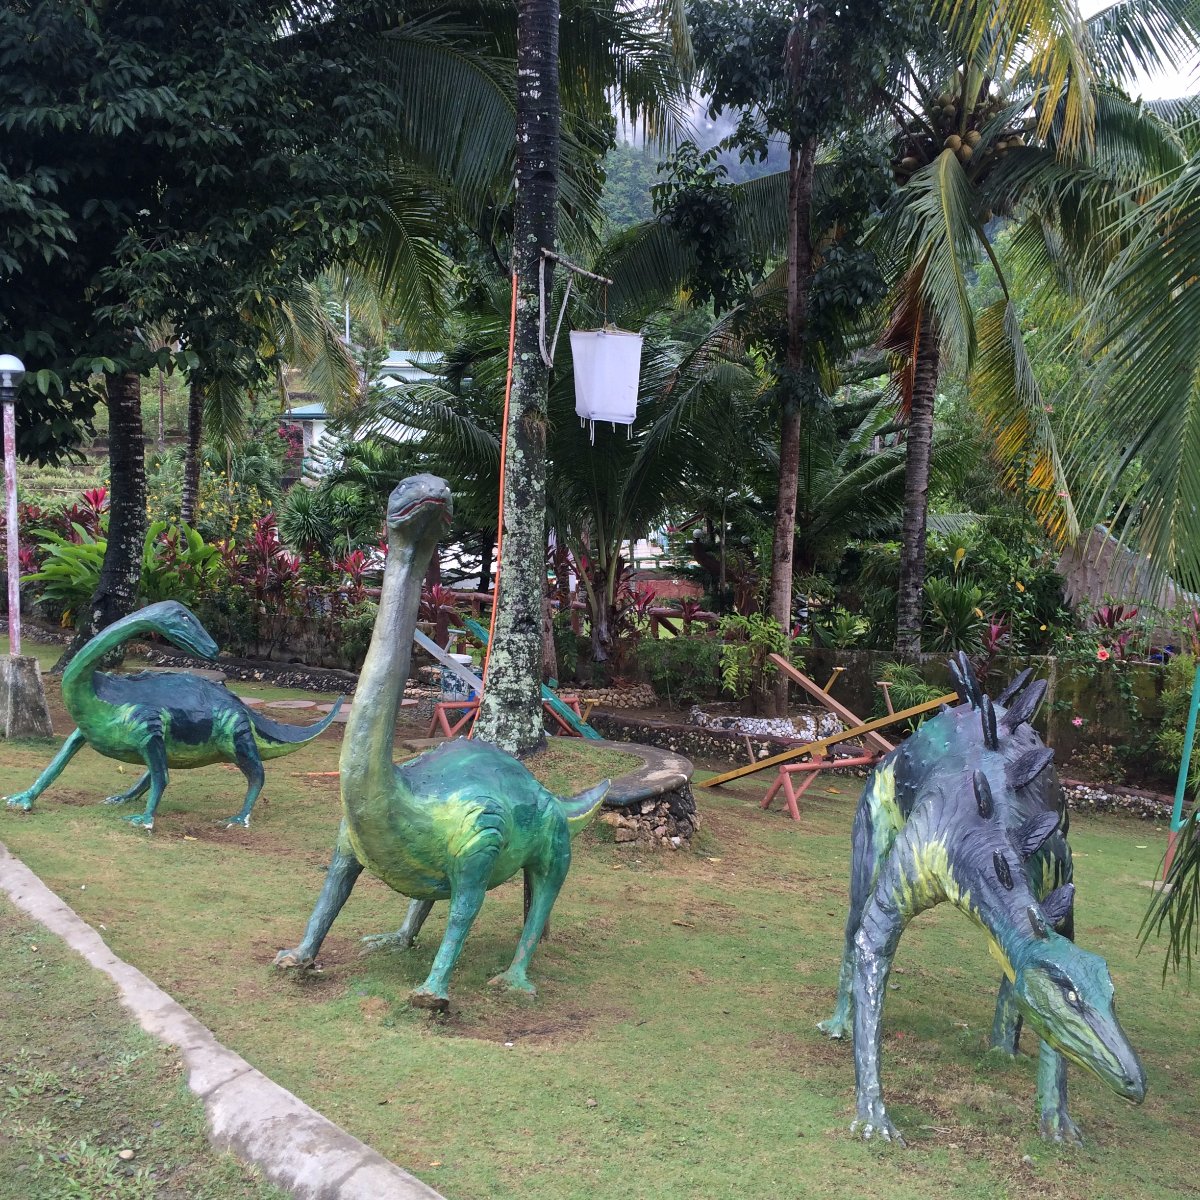 Dinosaurs, Statues